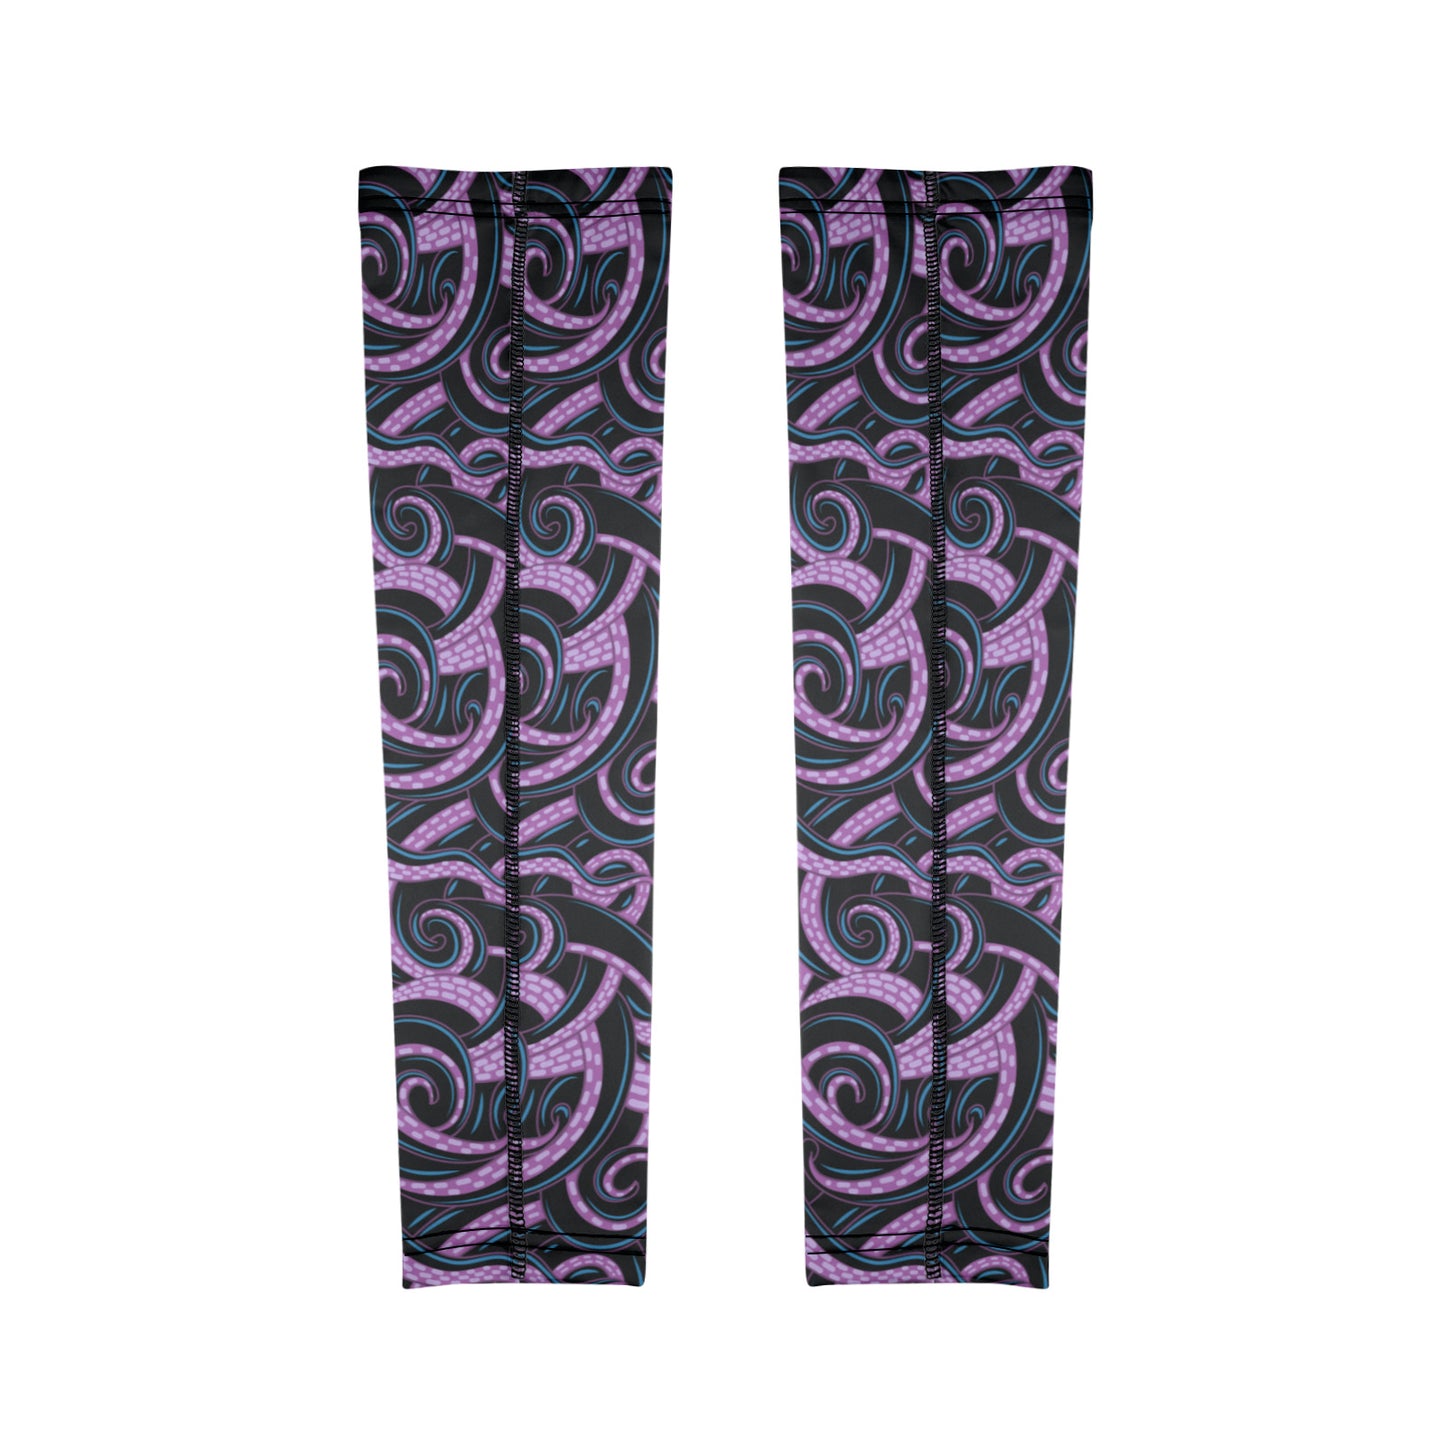 Ursula Tentacles Arm Sleeves (Set of Two)